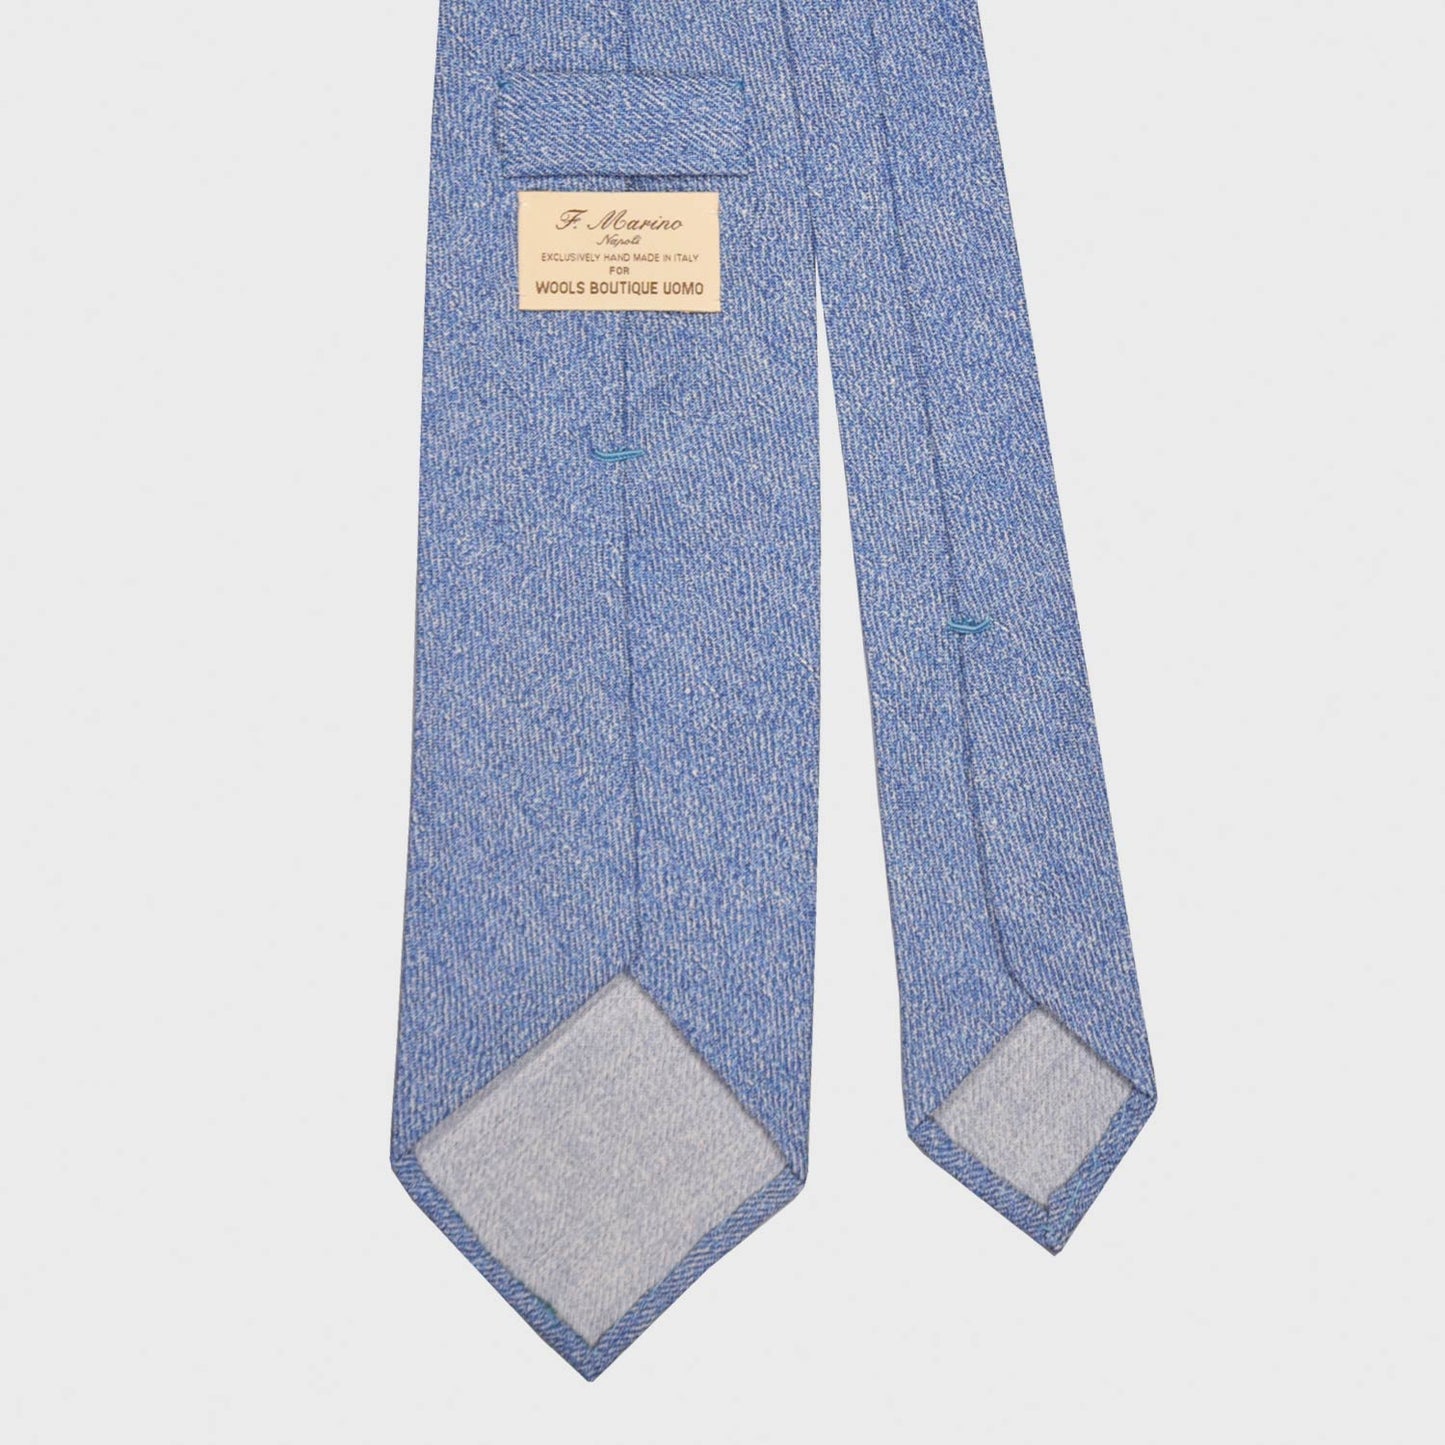 Load image into Gallery viewer, F.Marino Flamed Wool Tie Drapes 3 Folds Sky-Wools Boutique Uomo
